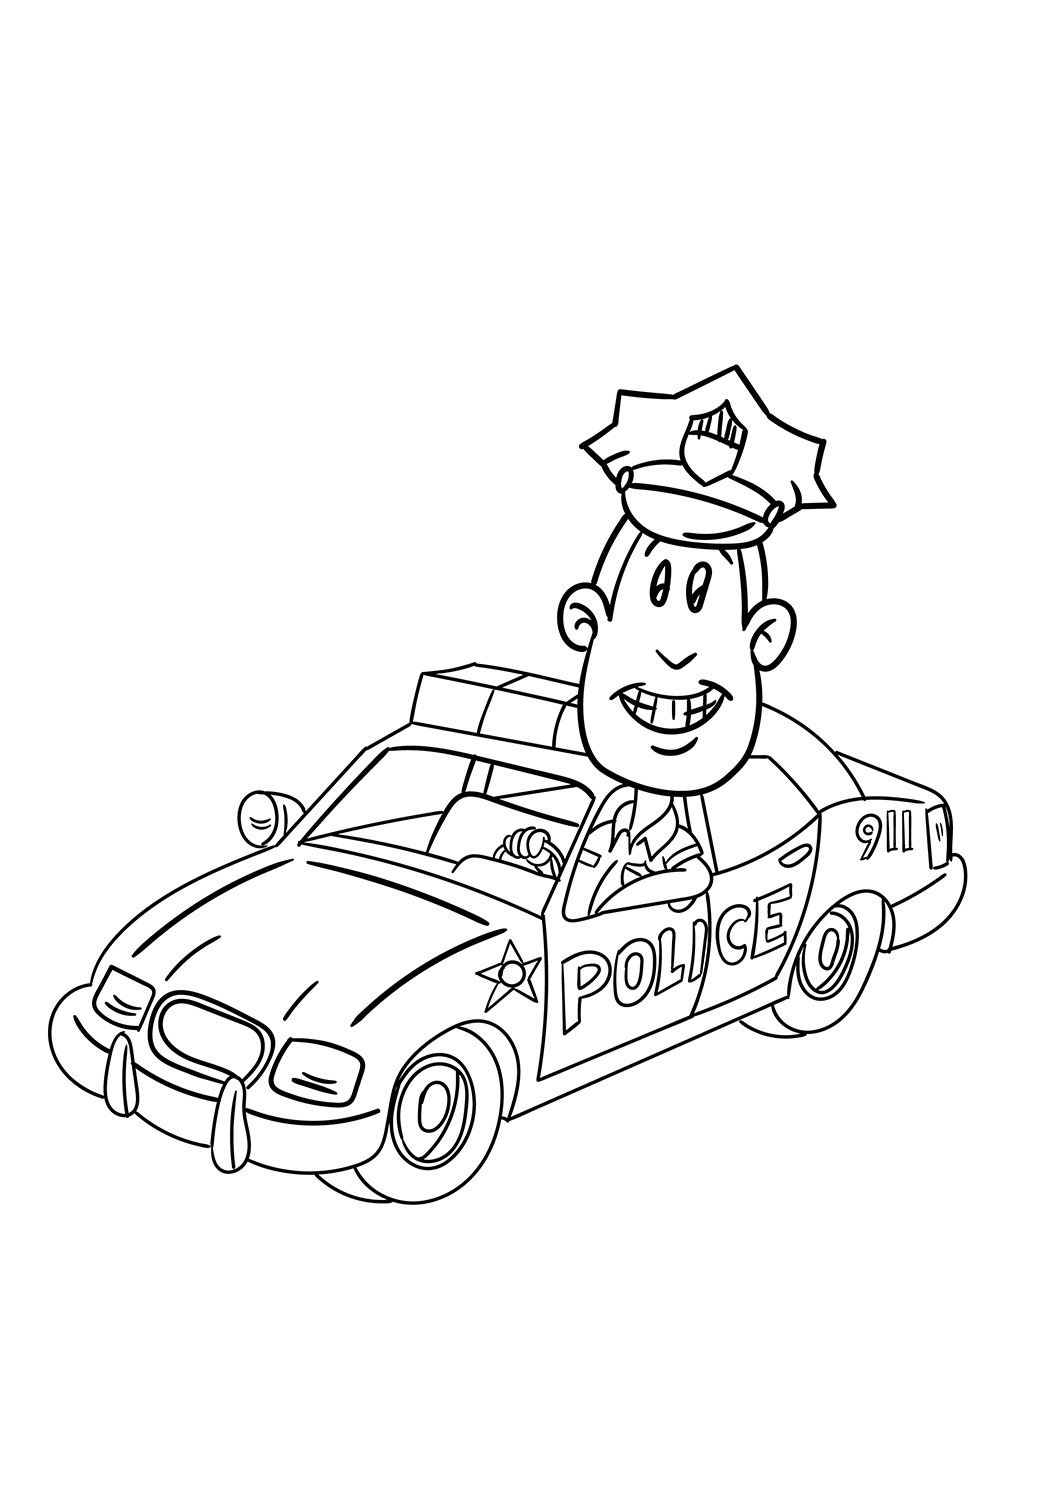 Policeman Police Car Coloring Pages Kidsworksheetfun | Images and ...